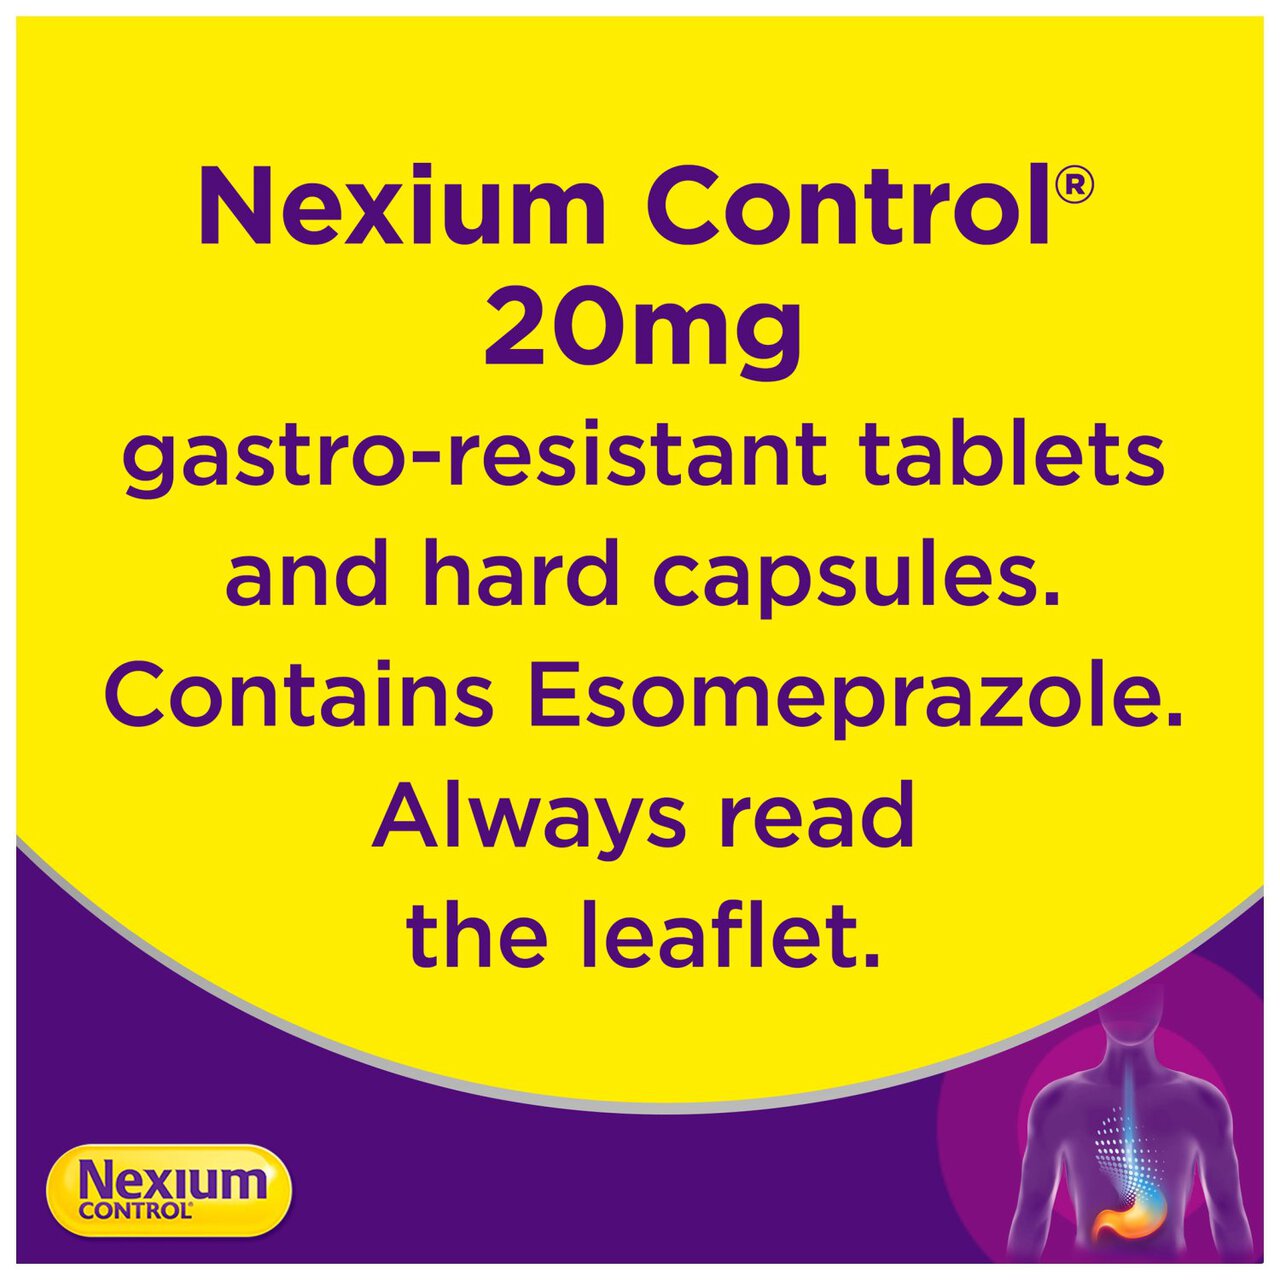 Nexium Control Heartburn and Acid Reflux Relief Tablets 14 per pack